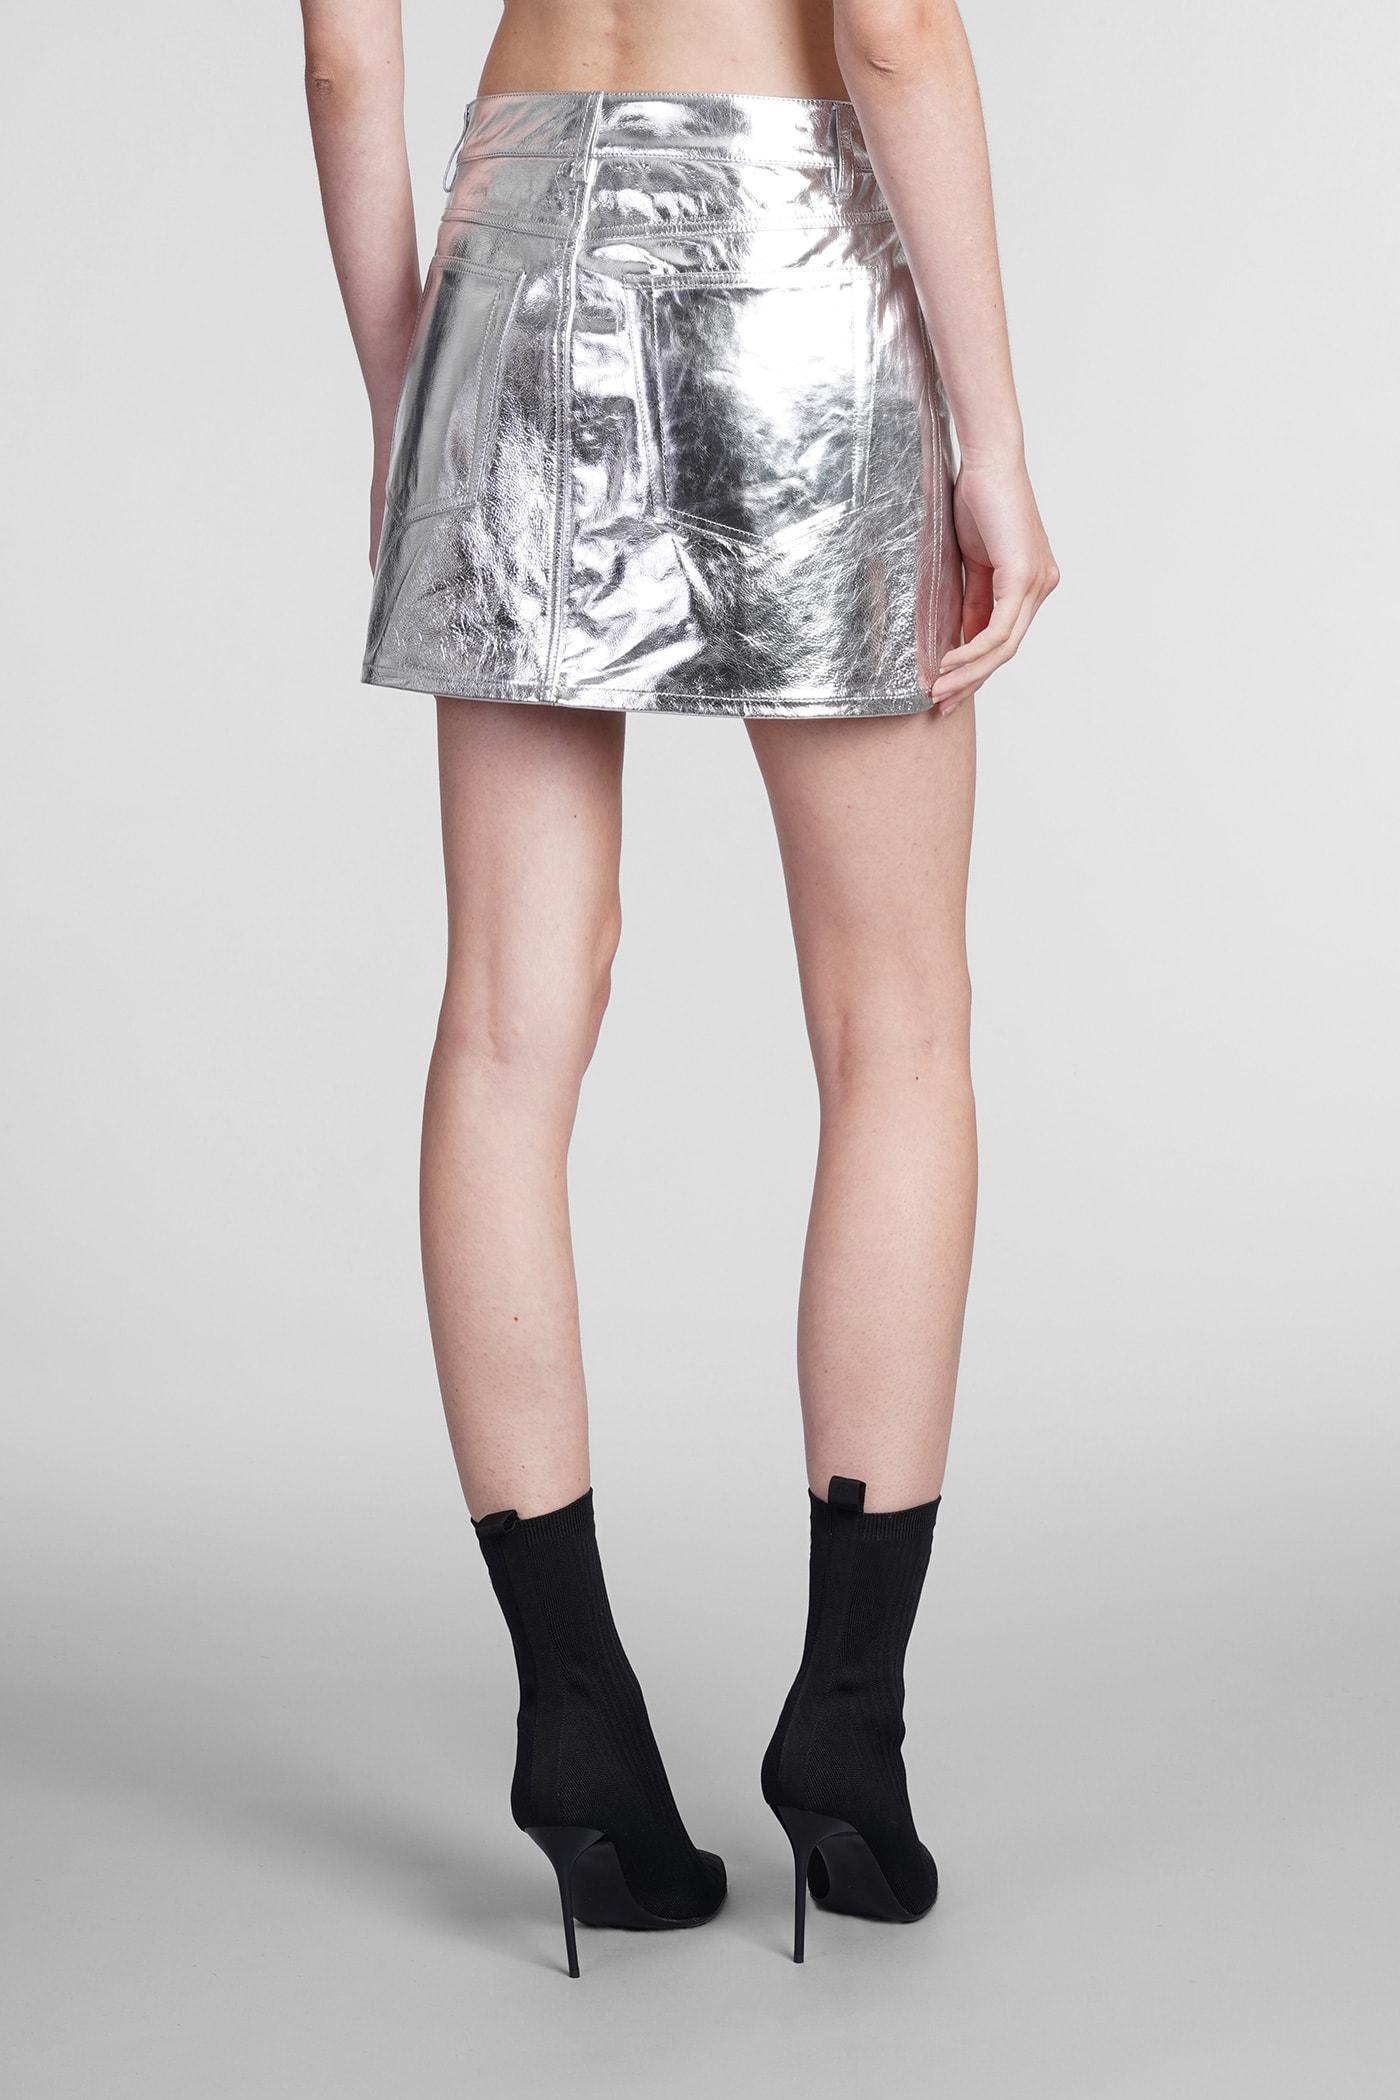 Helmut Lang Skirt In Silver Leather in Metallic | Lyst